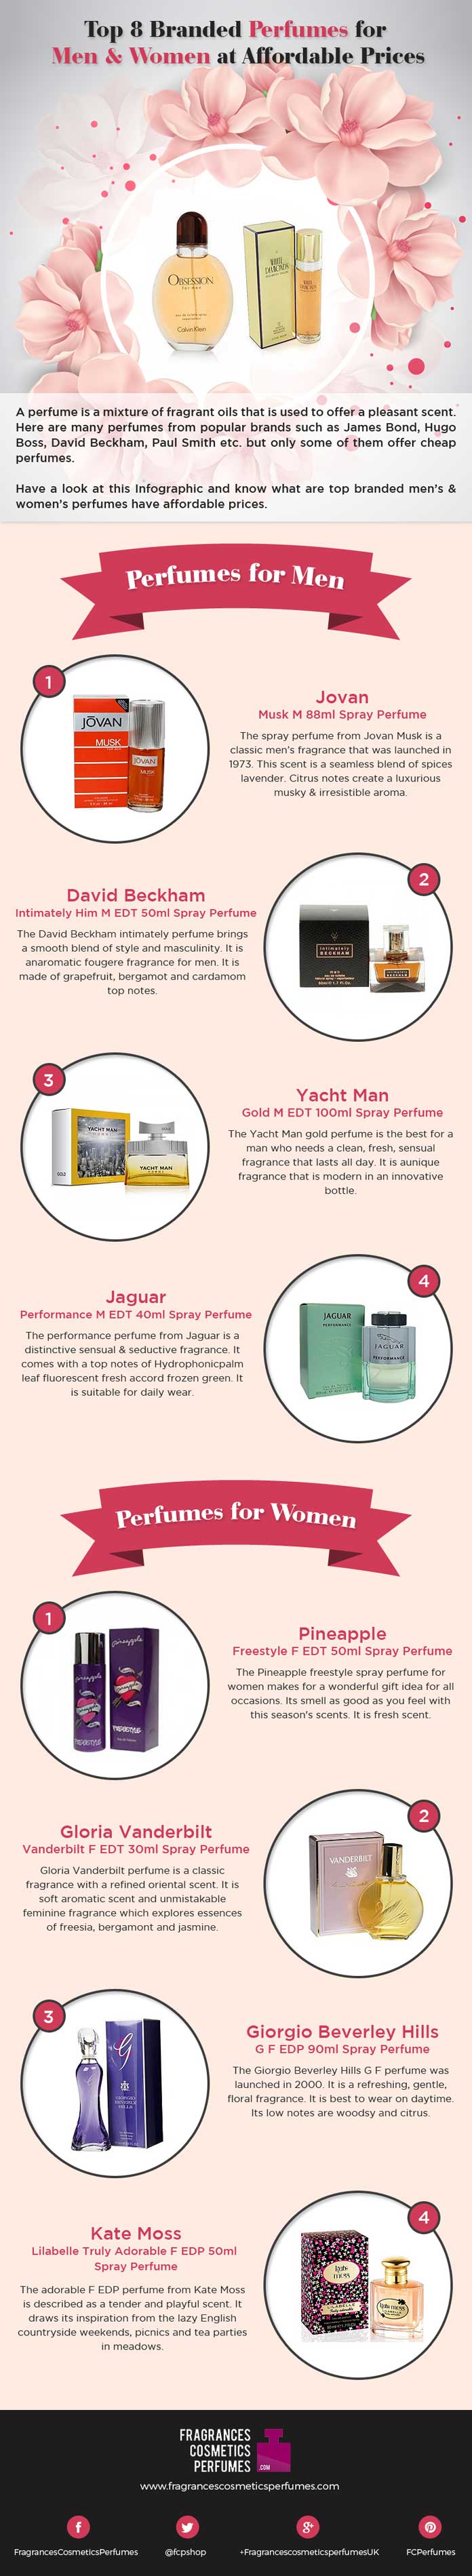 Top 8 Branded Perfumes for Men & Women at Affordable Prices [Infographic]